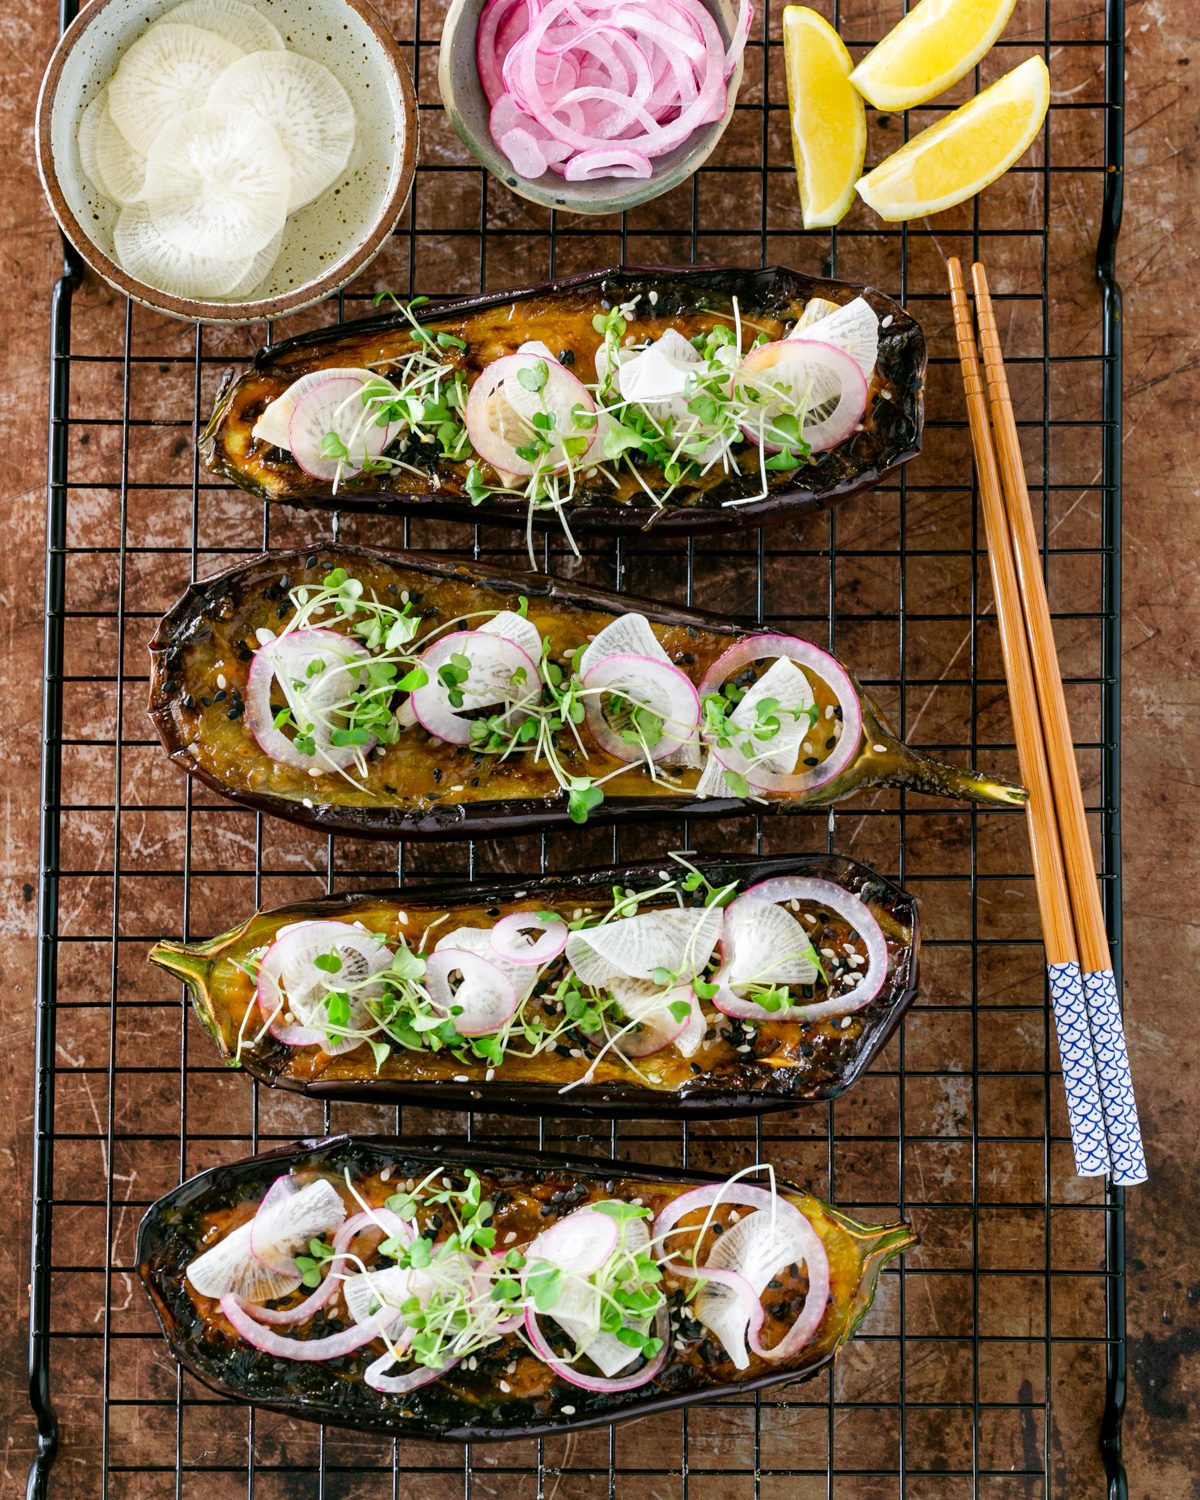 Miso glazed eggplants on a cooling tray